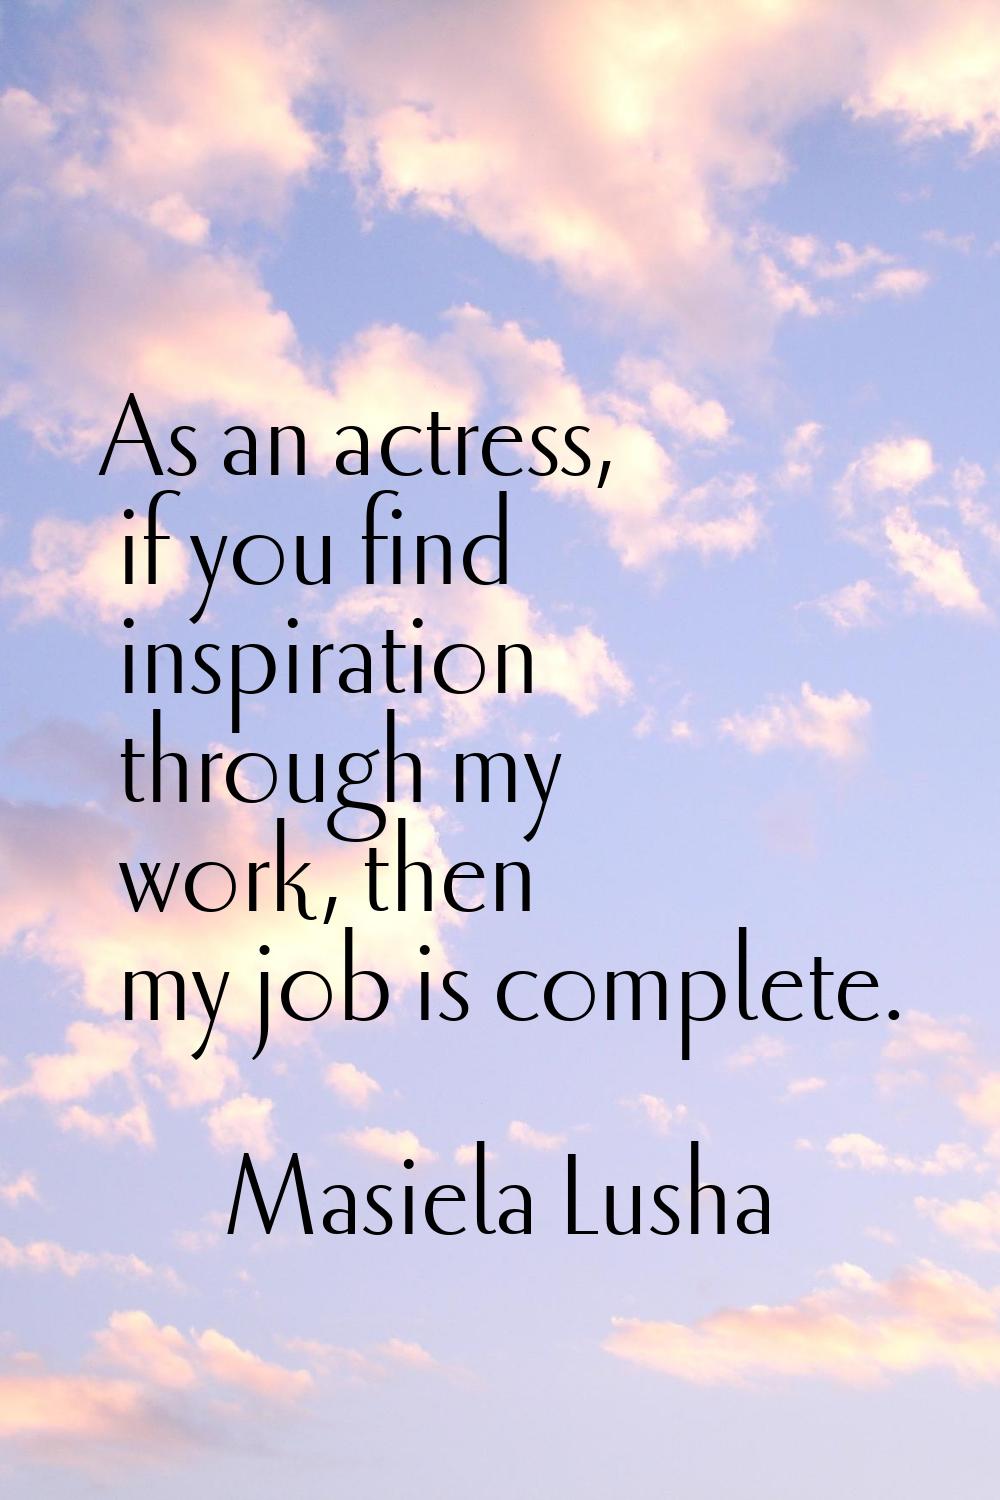 As an actress, if you find inspiration through my work, then my job is complete.